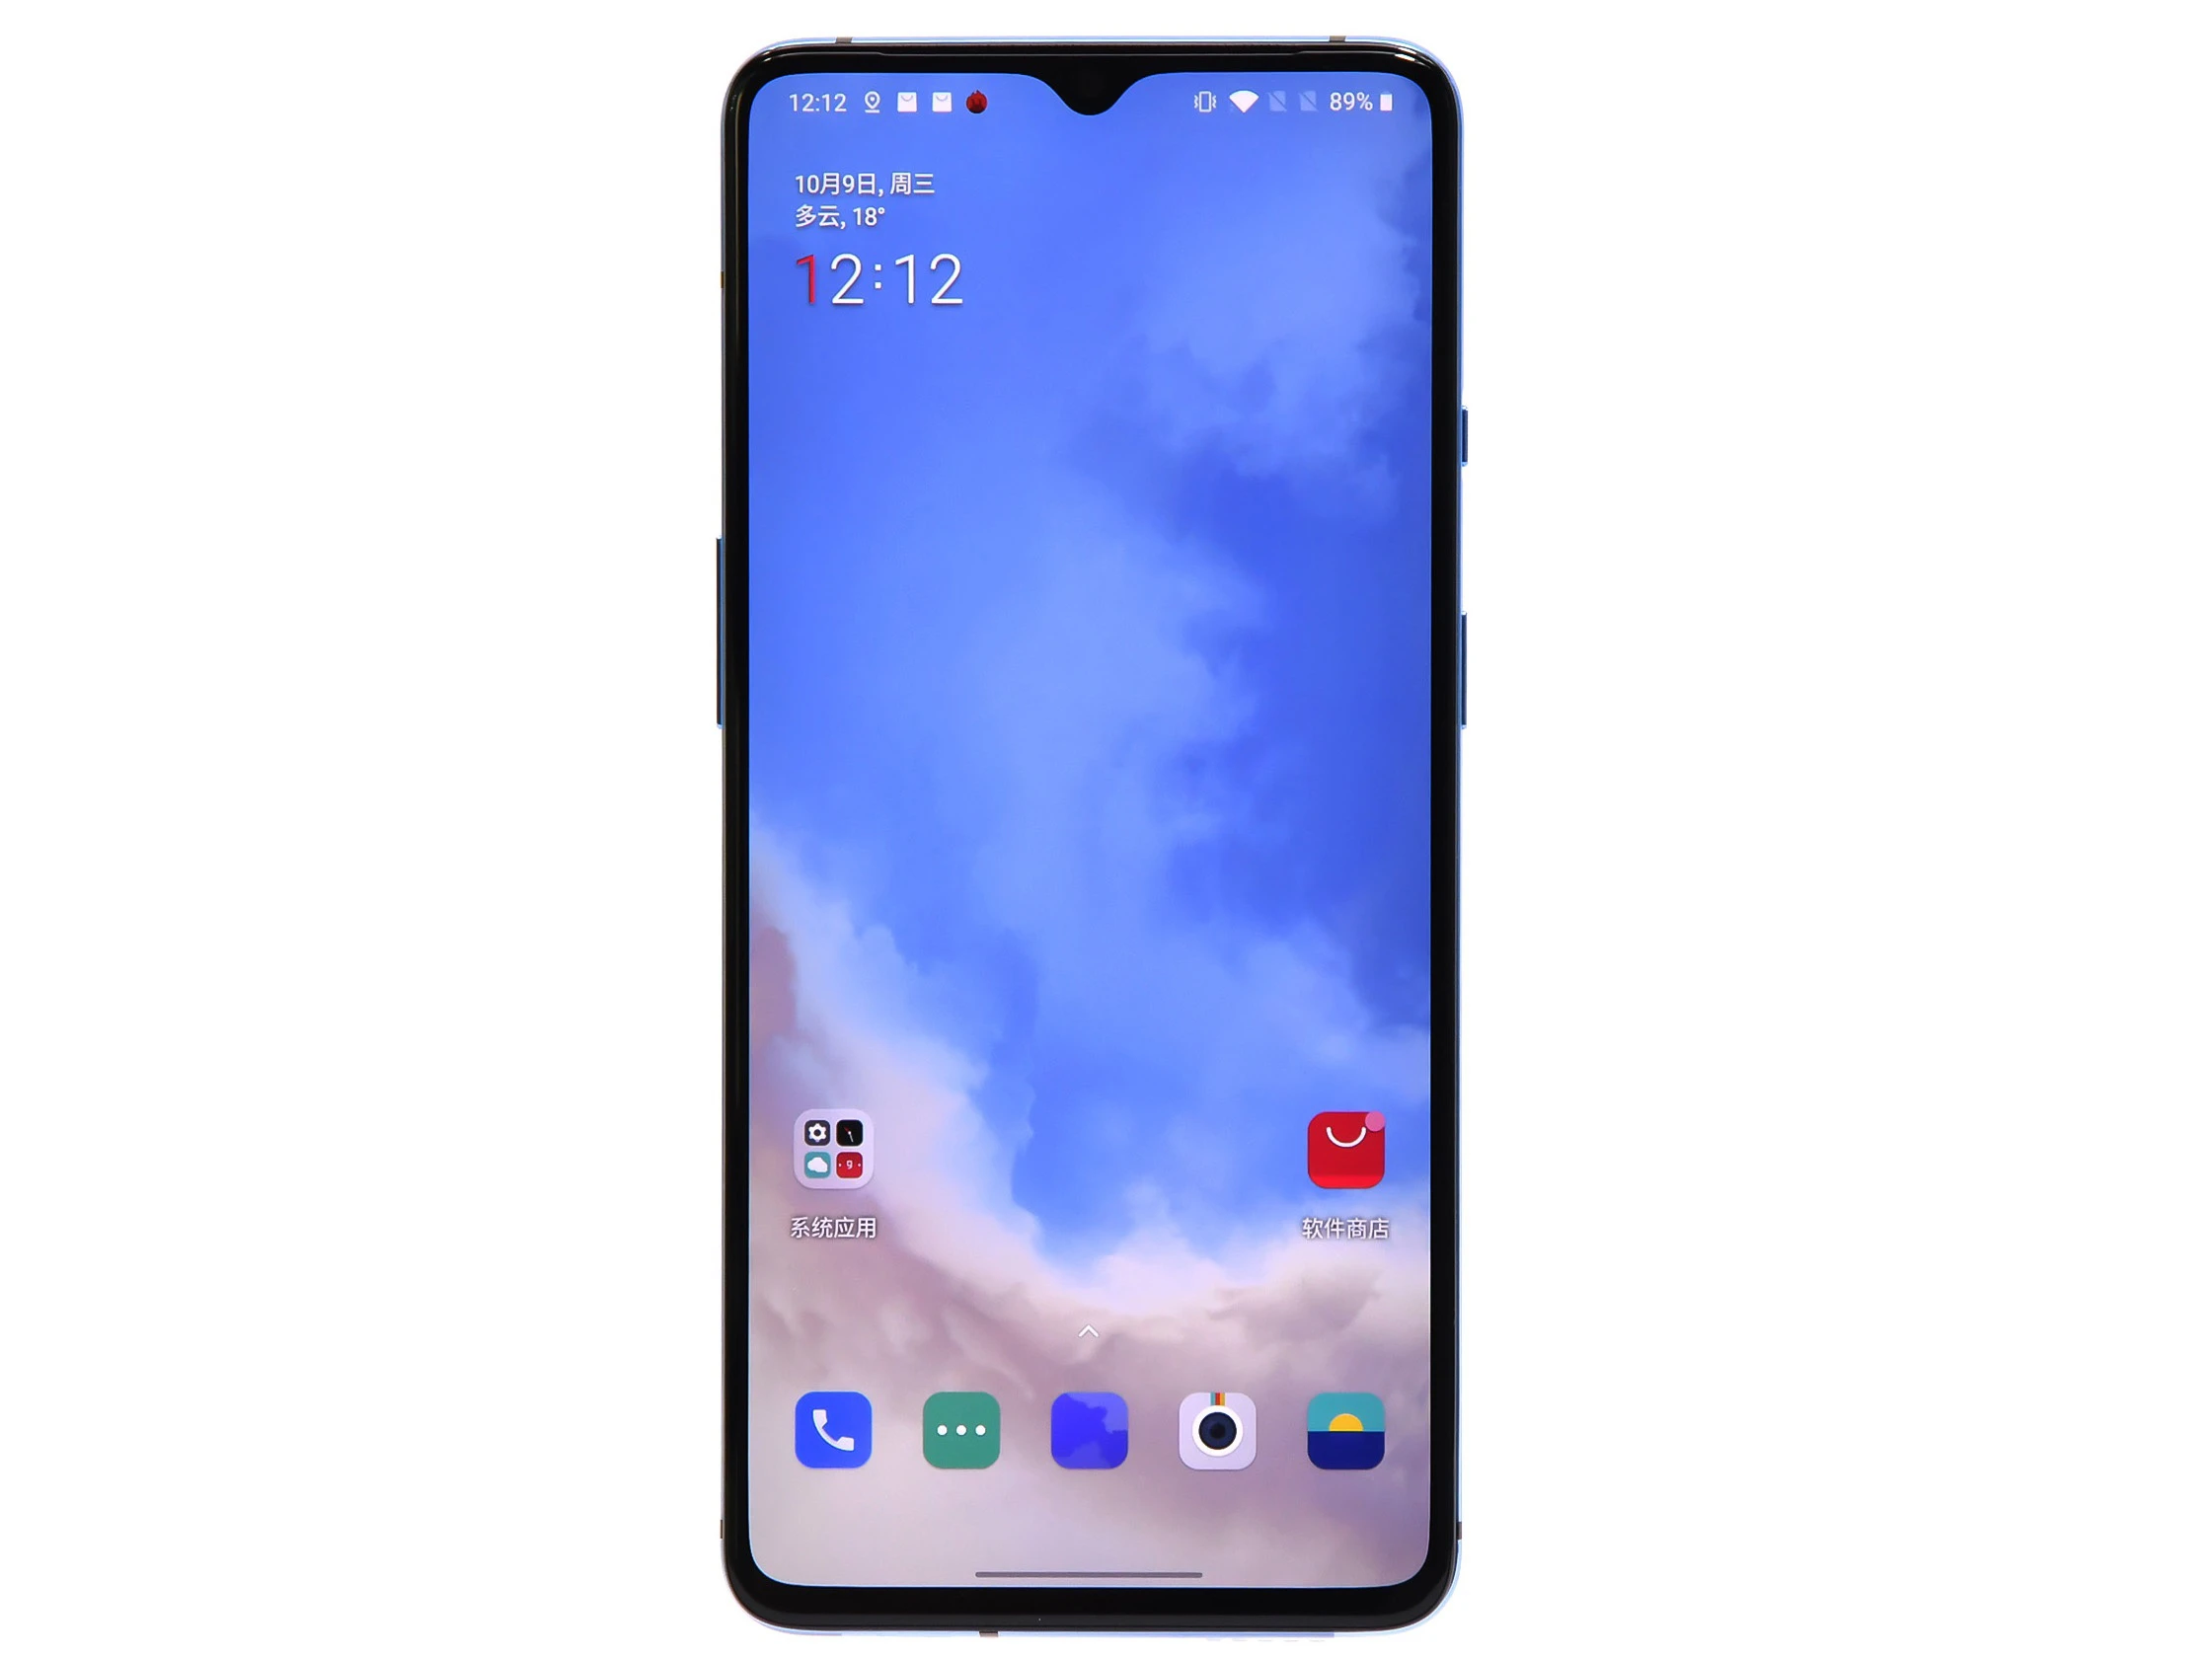 best oneplus nord phone New Original Global Rom OnePlus 7T 8GB 256GB Smartphone Snapdragon 855 Plus Octa Core 90Hz AMOLED Screen 48MP NFC cellphone one plus cell phone